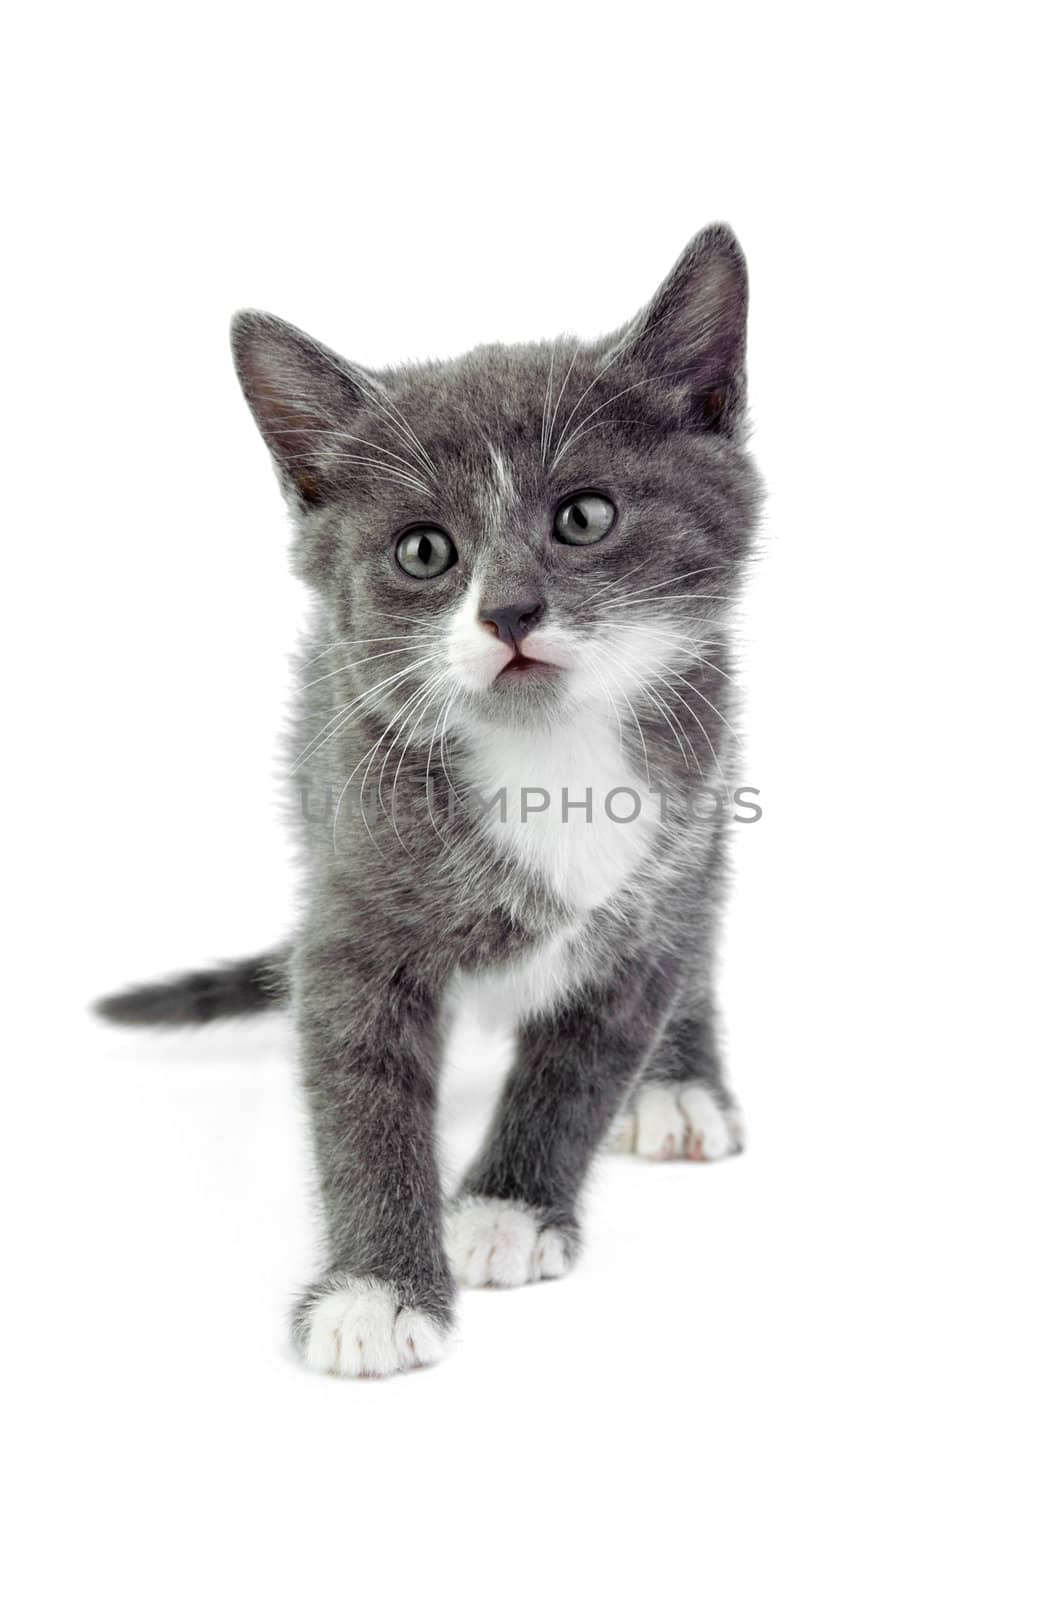 An image of a little grey kitten on white background